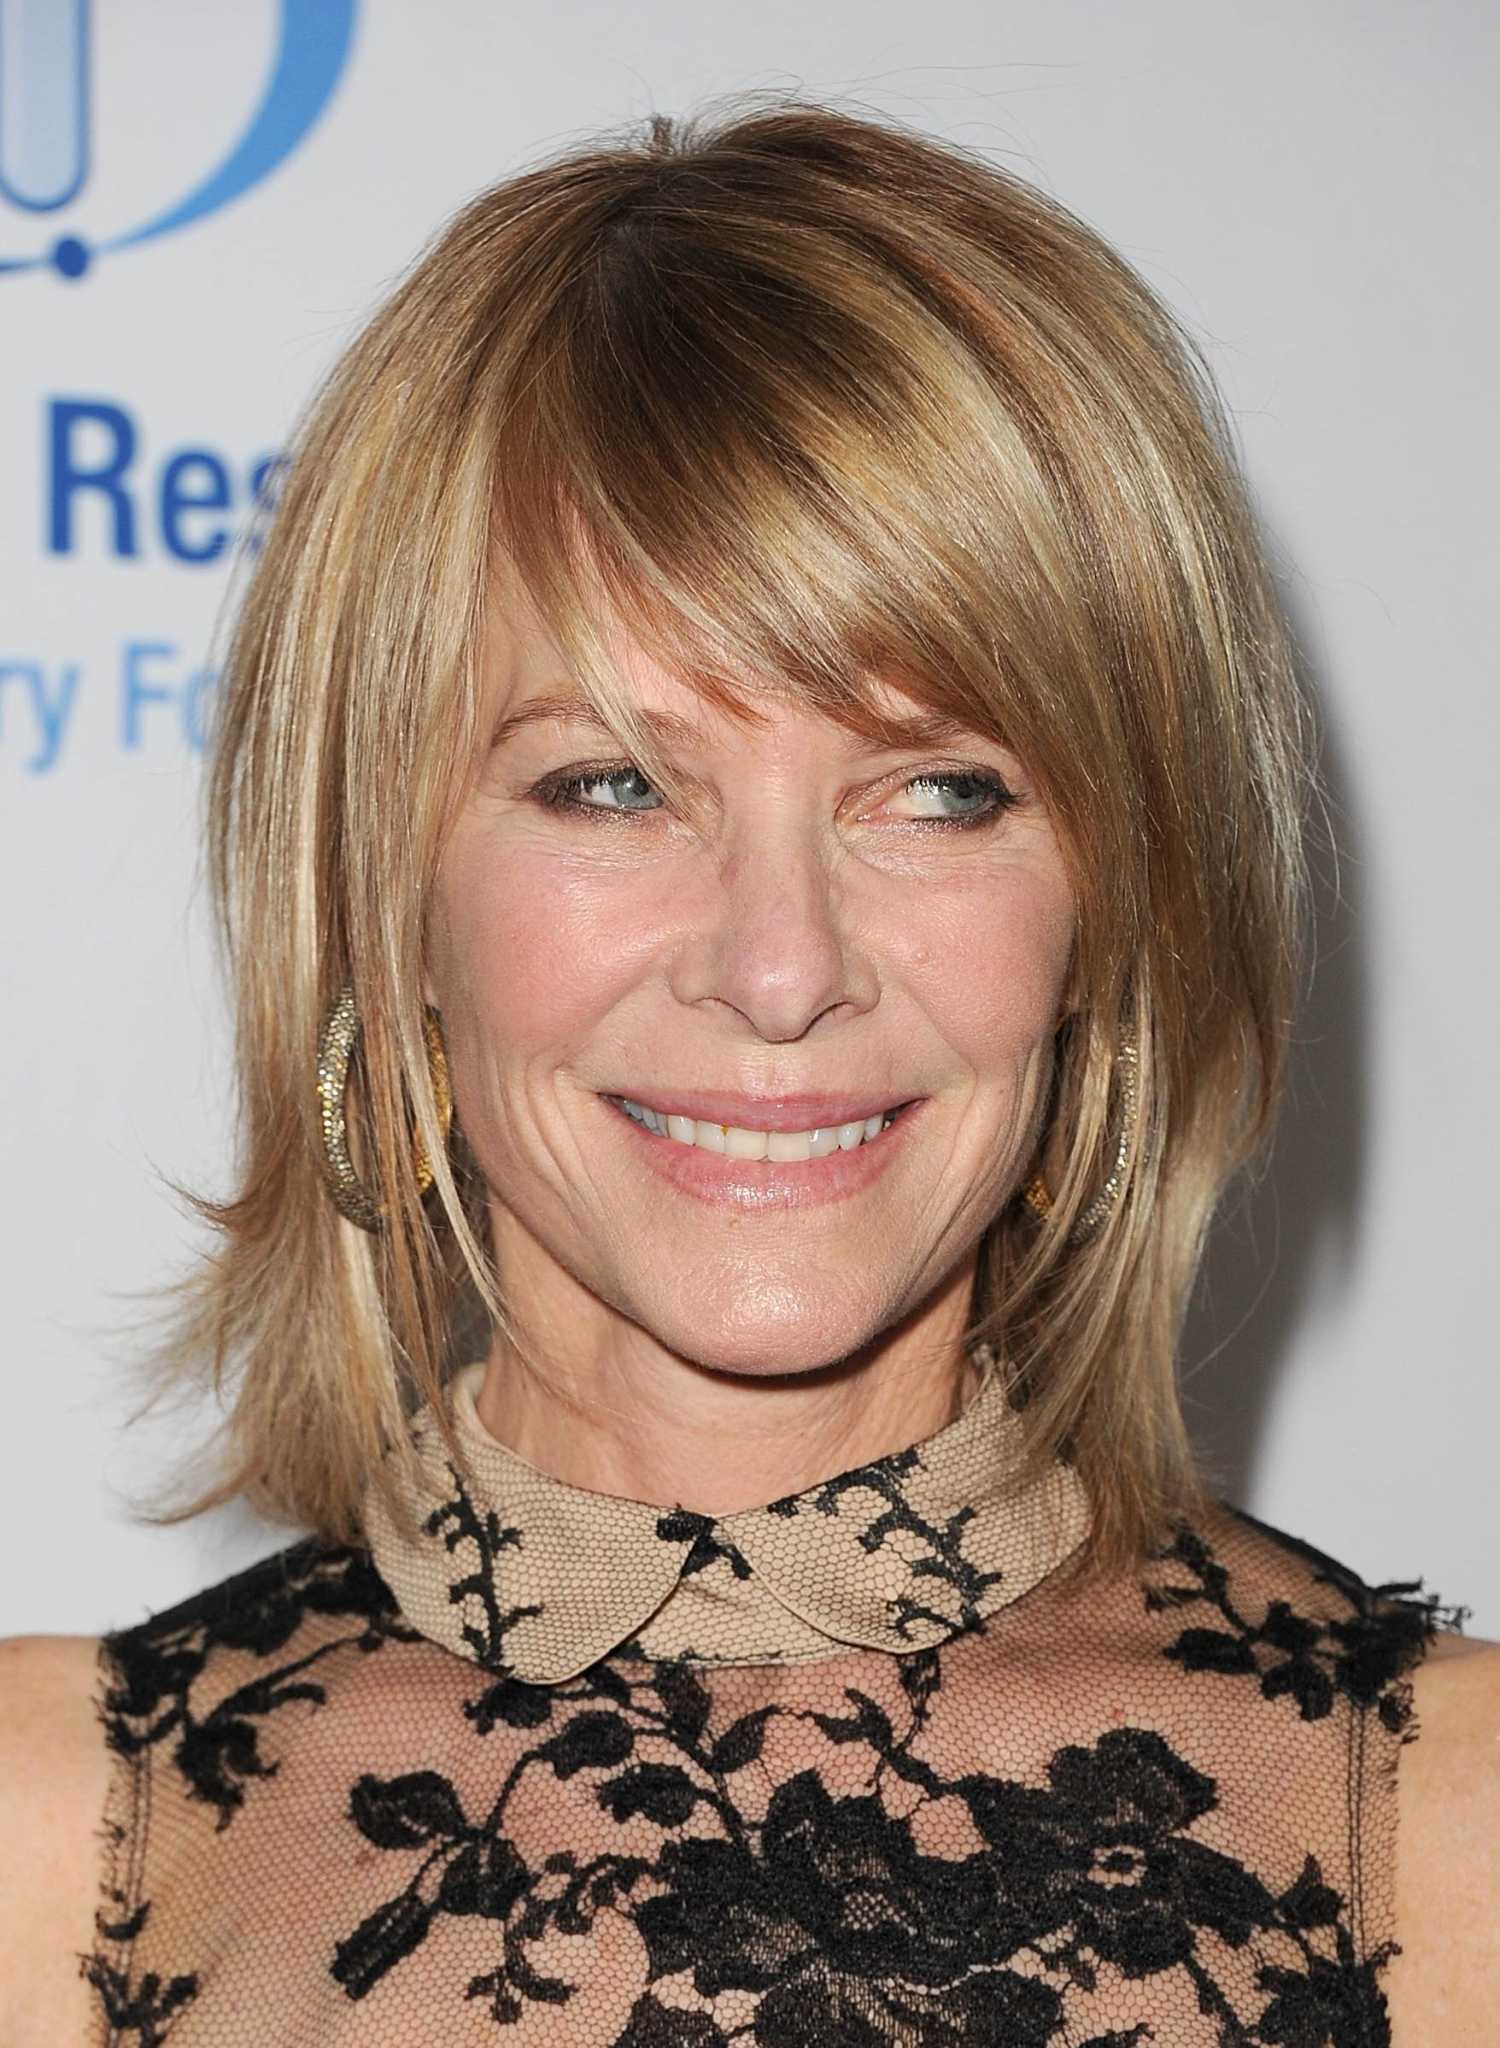 BEVERLY HILLS, CA - FEBRUARY 10: Actress Kate Capshaw arrives at the 14th annual Unforgettable Evening benefiting EIFís WCRF held at Beverly Wilshire Four Seasons Hotel on February 10, 2011 in Beverly Hills, California. (Photo by Jason Merritt/Getty Images)